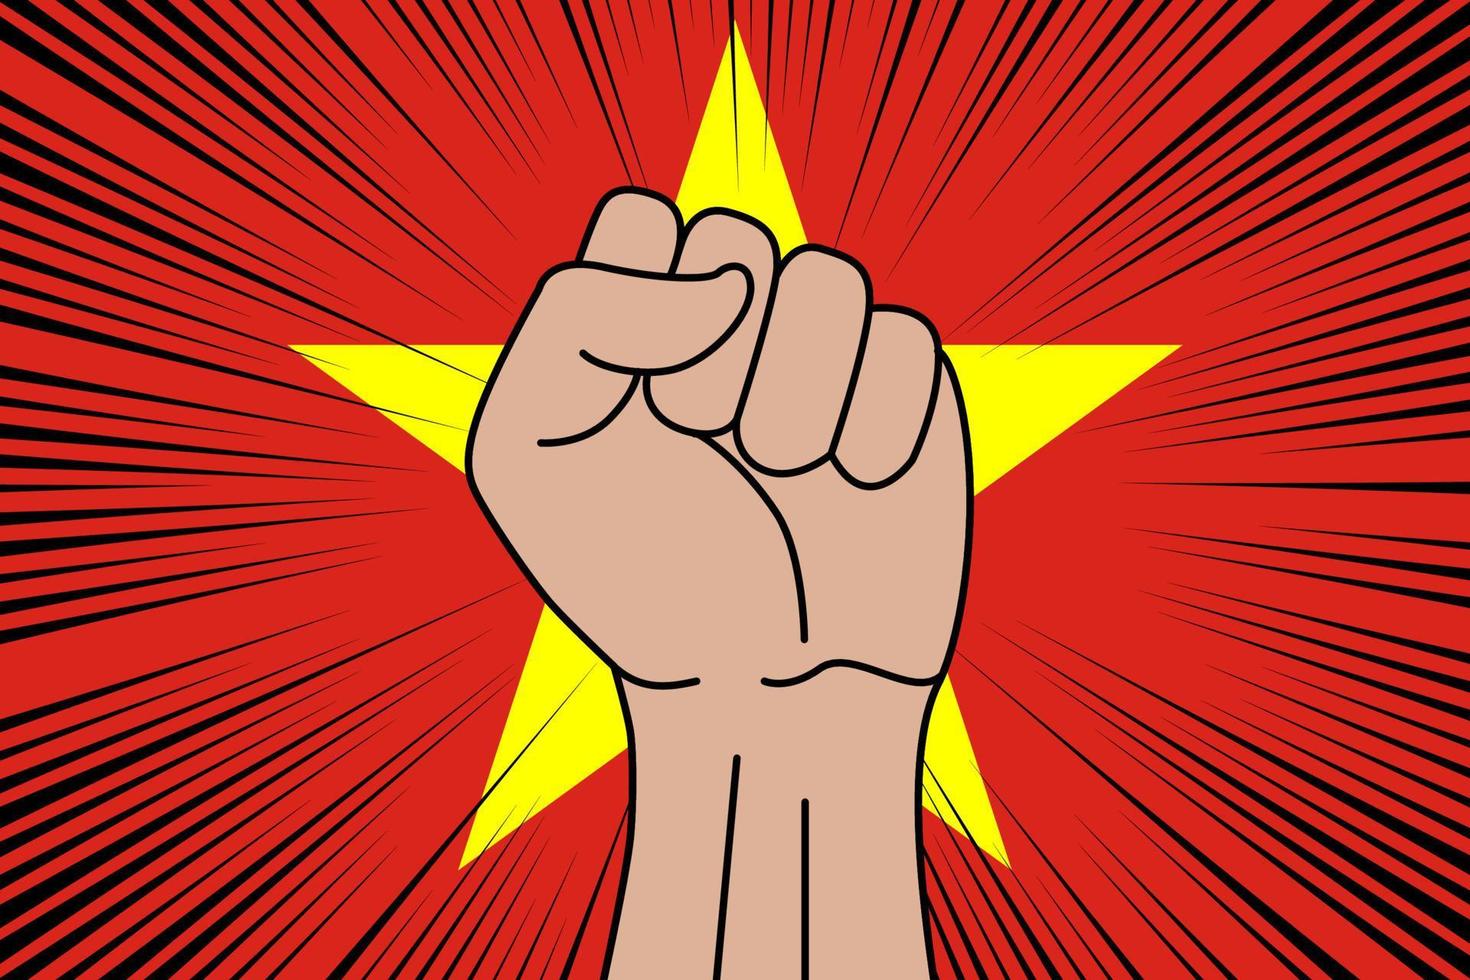 Human fist clenched symbol on flag of Vietnam vector